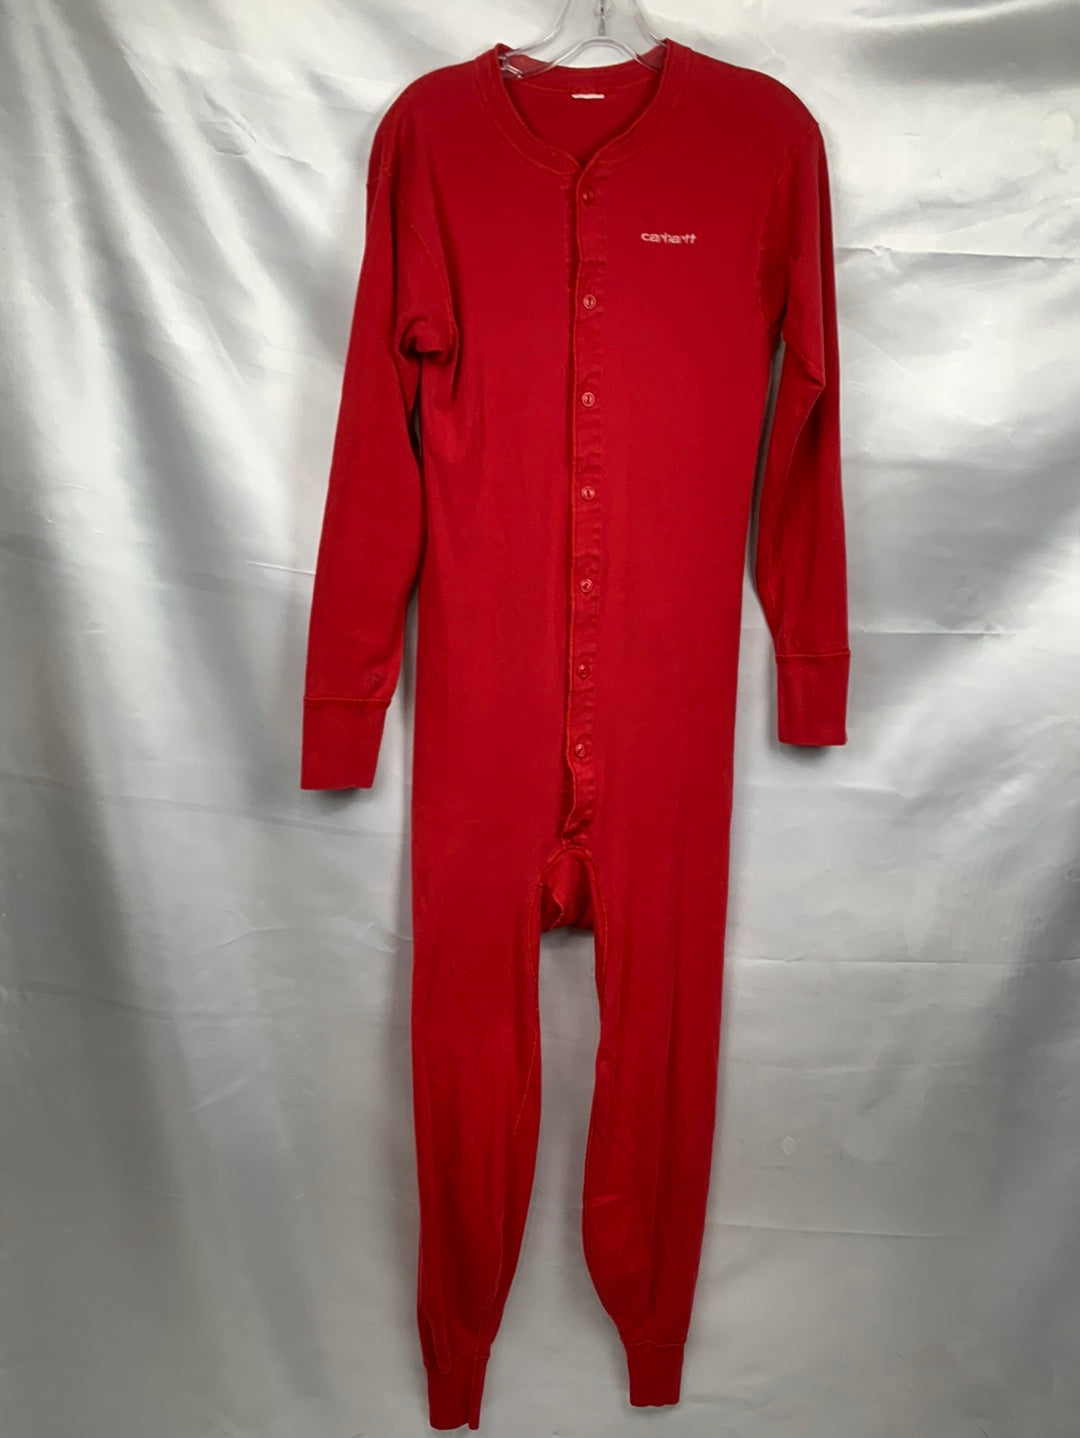 Union Suit Long Johns Thermal Underwear Mens 38 -40 Red – The Costume Party  & Dance Shop LLP